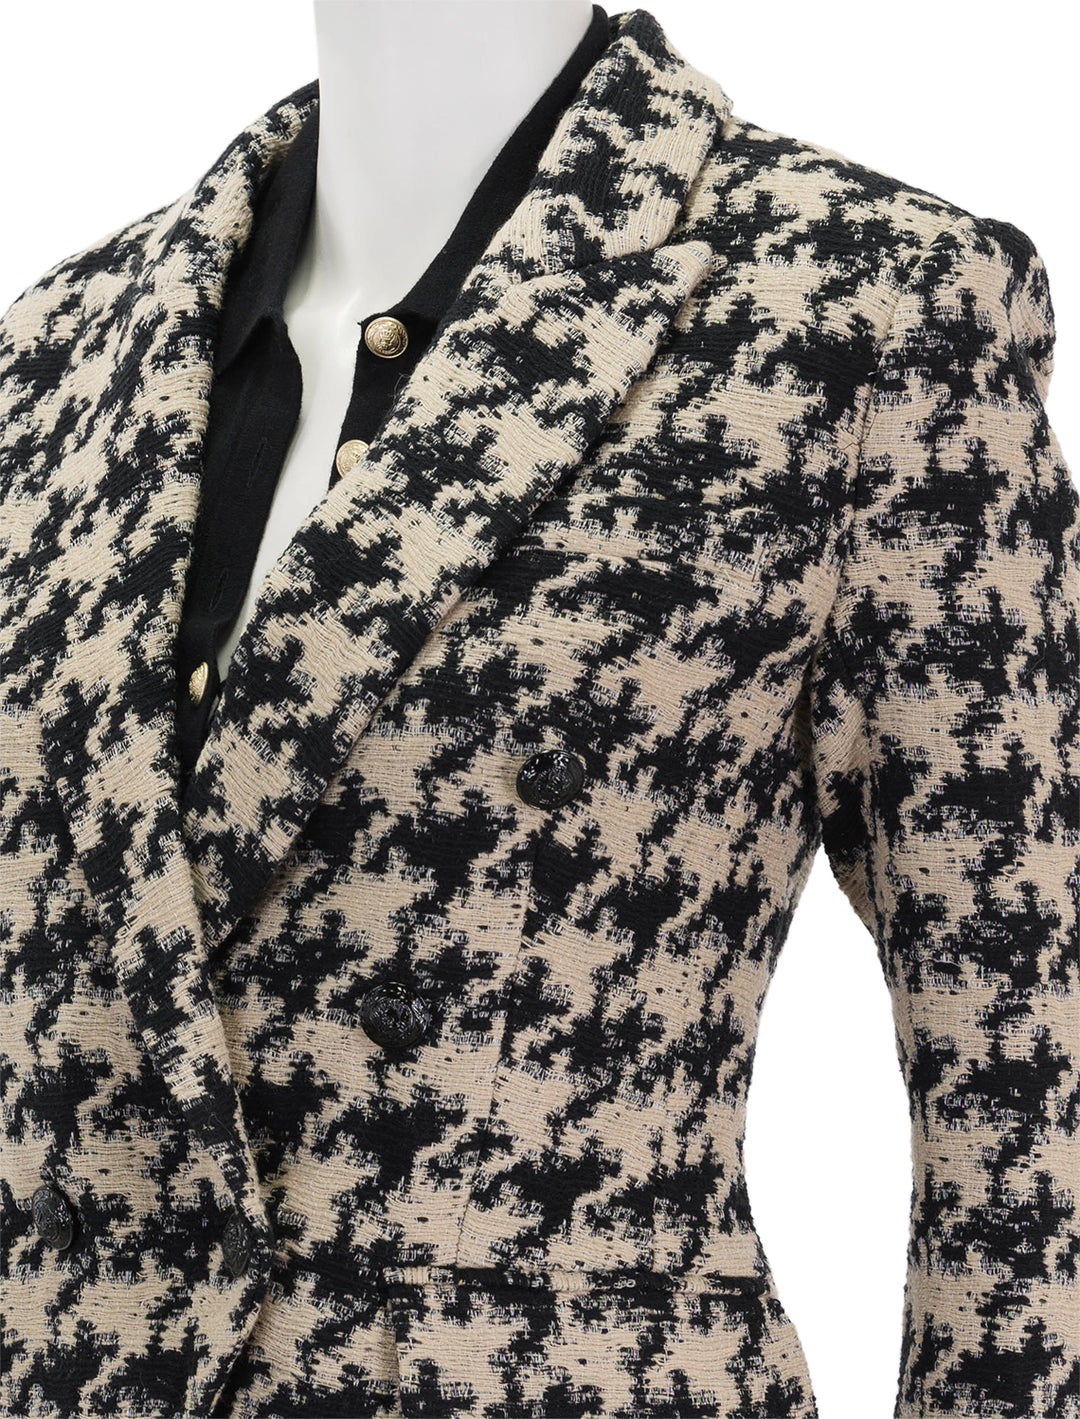 Close-up view of L'agence's kenzie blazer in houndstooth.